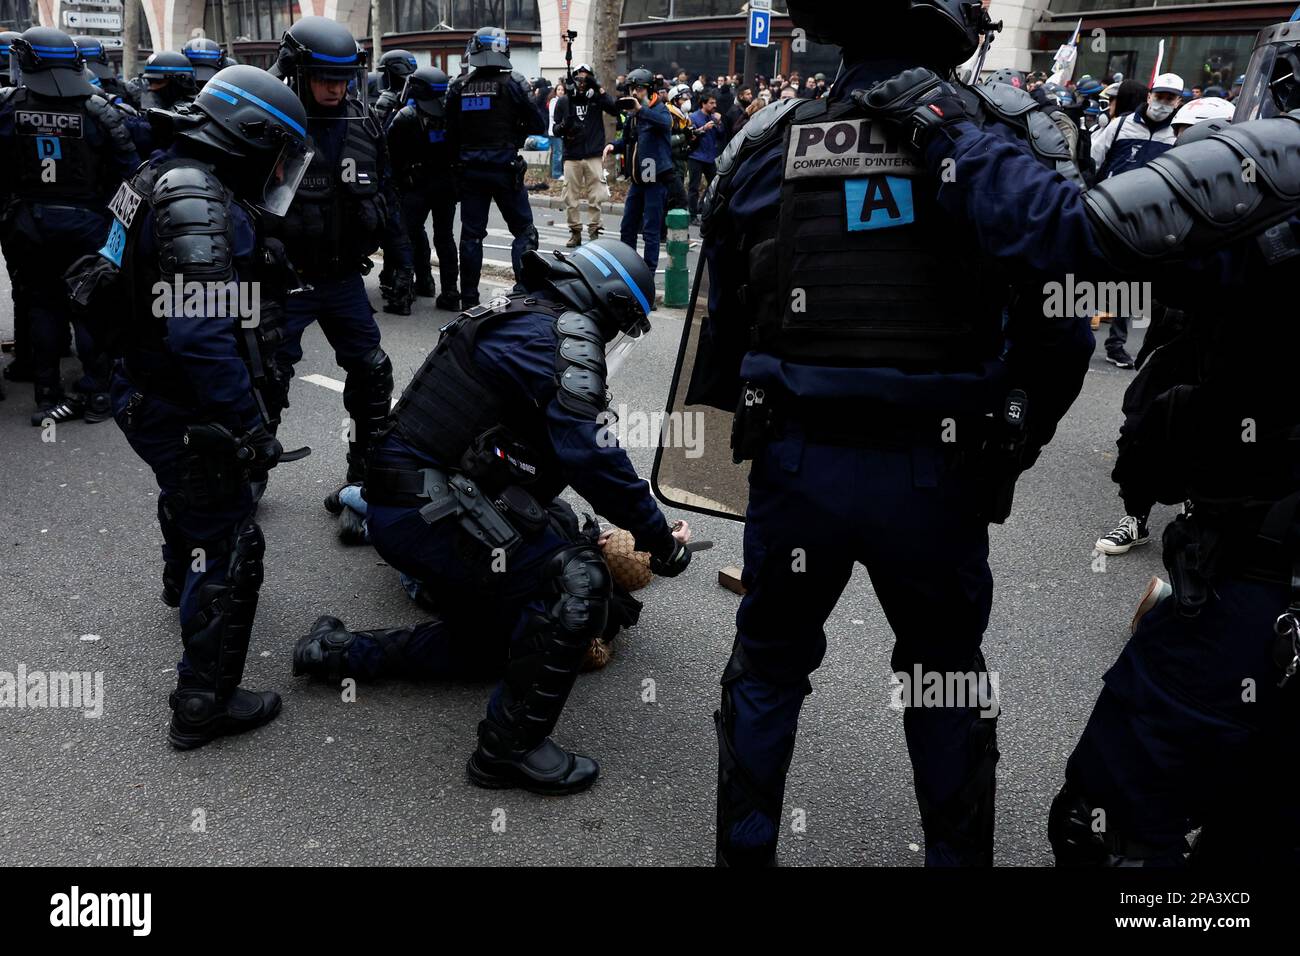 Police officers detain a demonstrator during a march against the government's pension reform plan in Paris, France, March 11, 2023.  REUTERS/Benoit Tessier Stock Photo